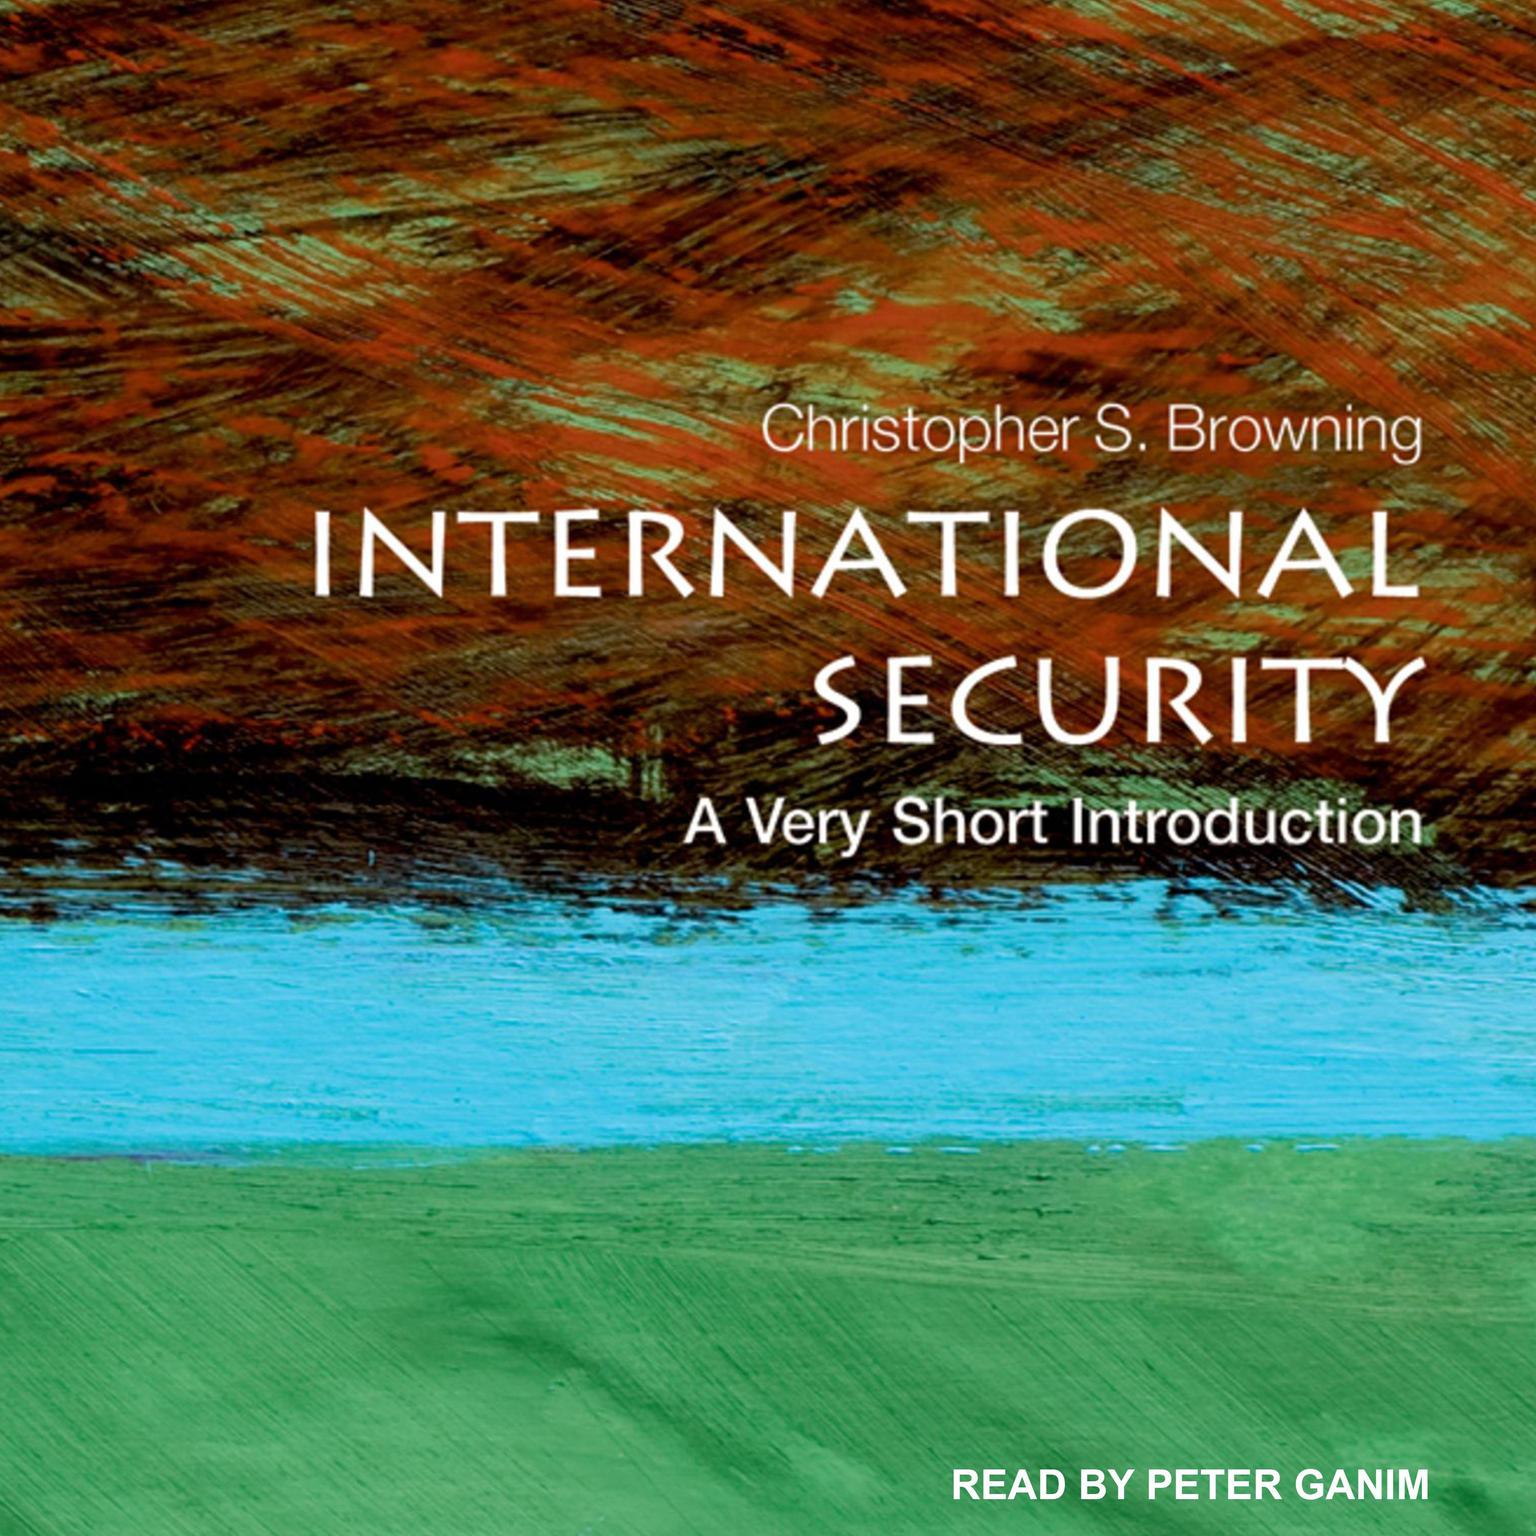 International Security: A Very Short Introduction Audiobook, by Christopher S. Browning